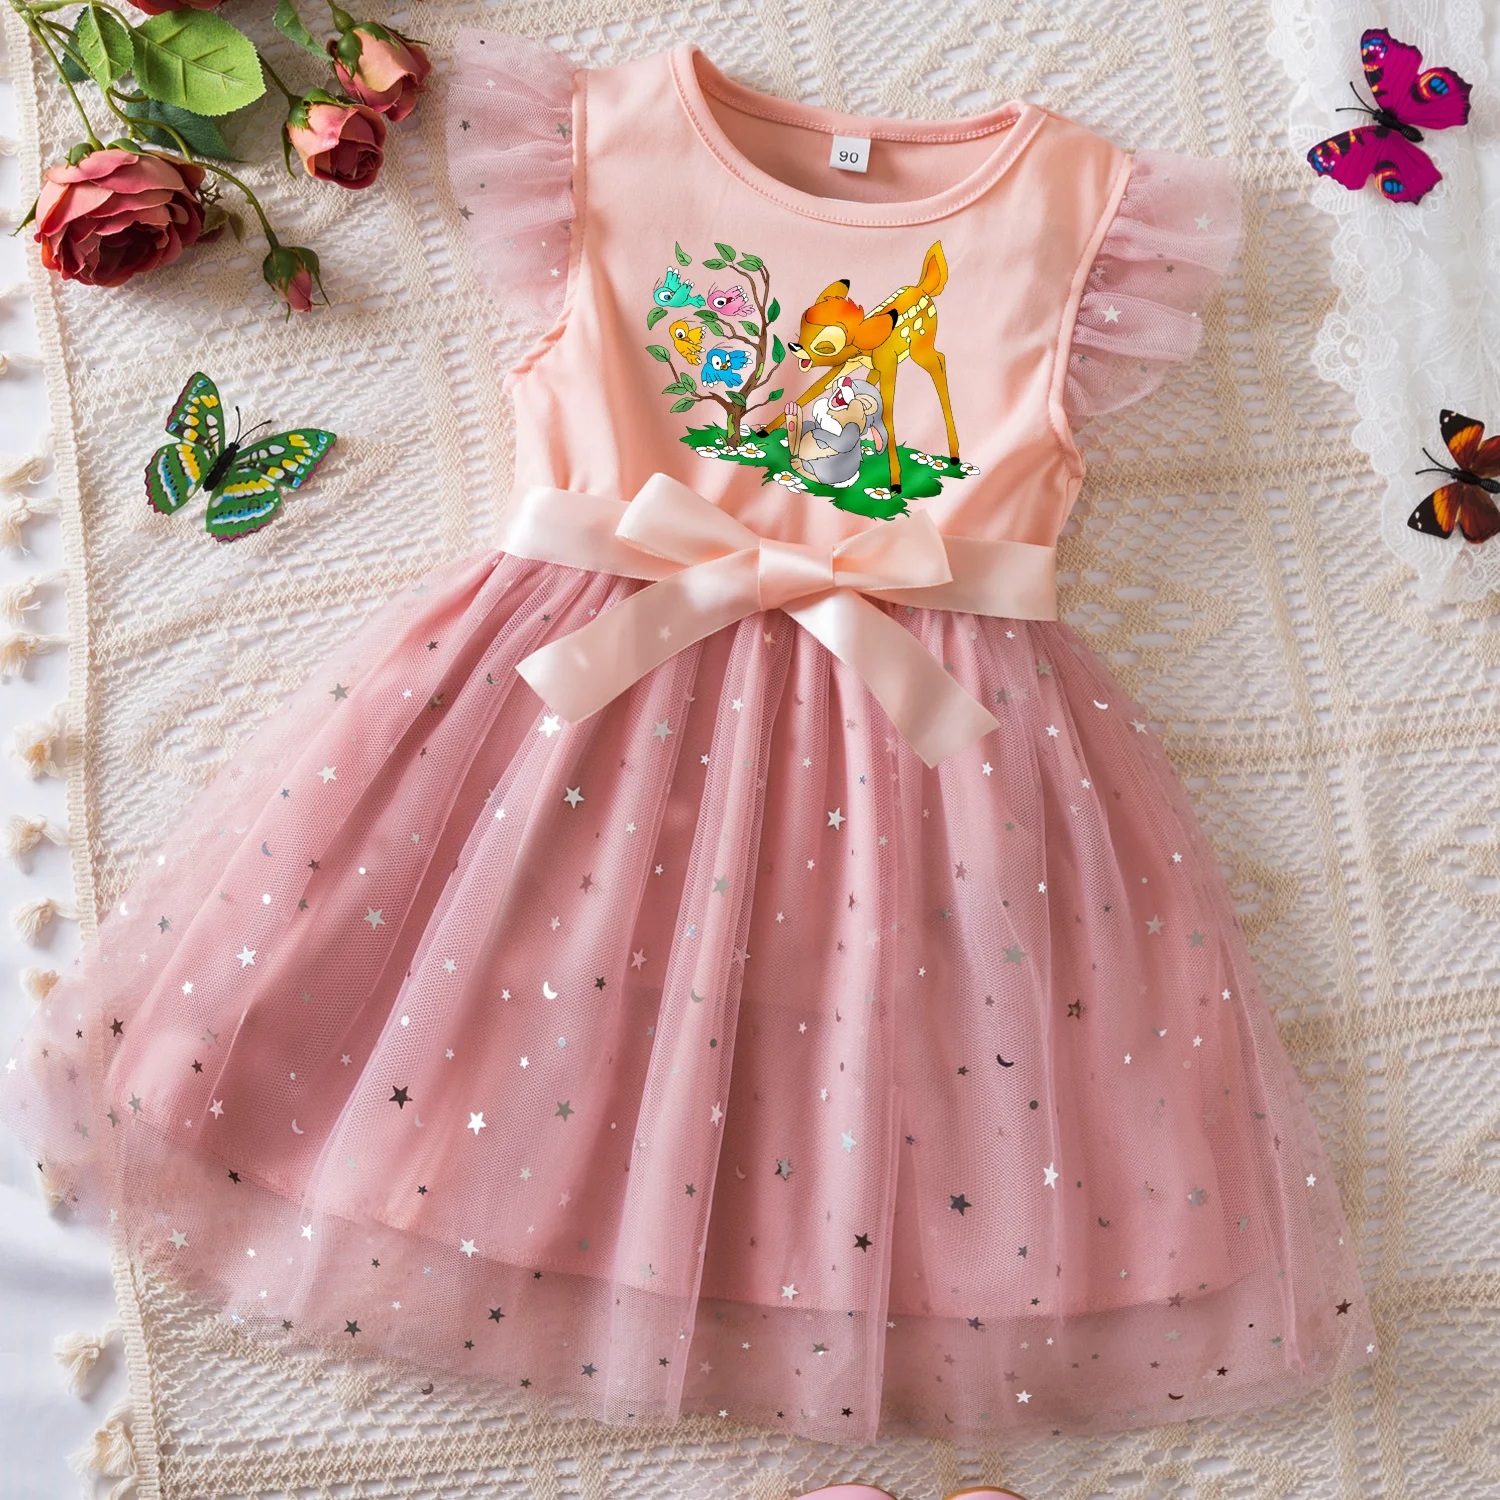 

Bambi Sweet Girls Summer Clothes Flying Sleeves Bow Sequin Dress 2-6Y Kid Birthday Pink Fluffy Tutu Princess Dress for Baby Girl